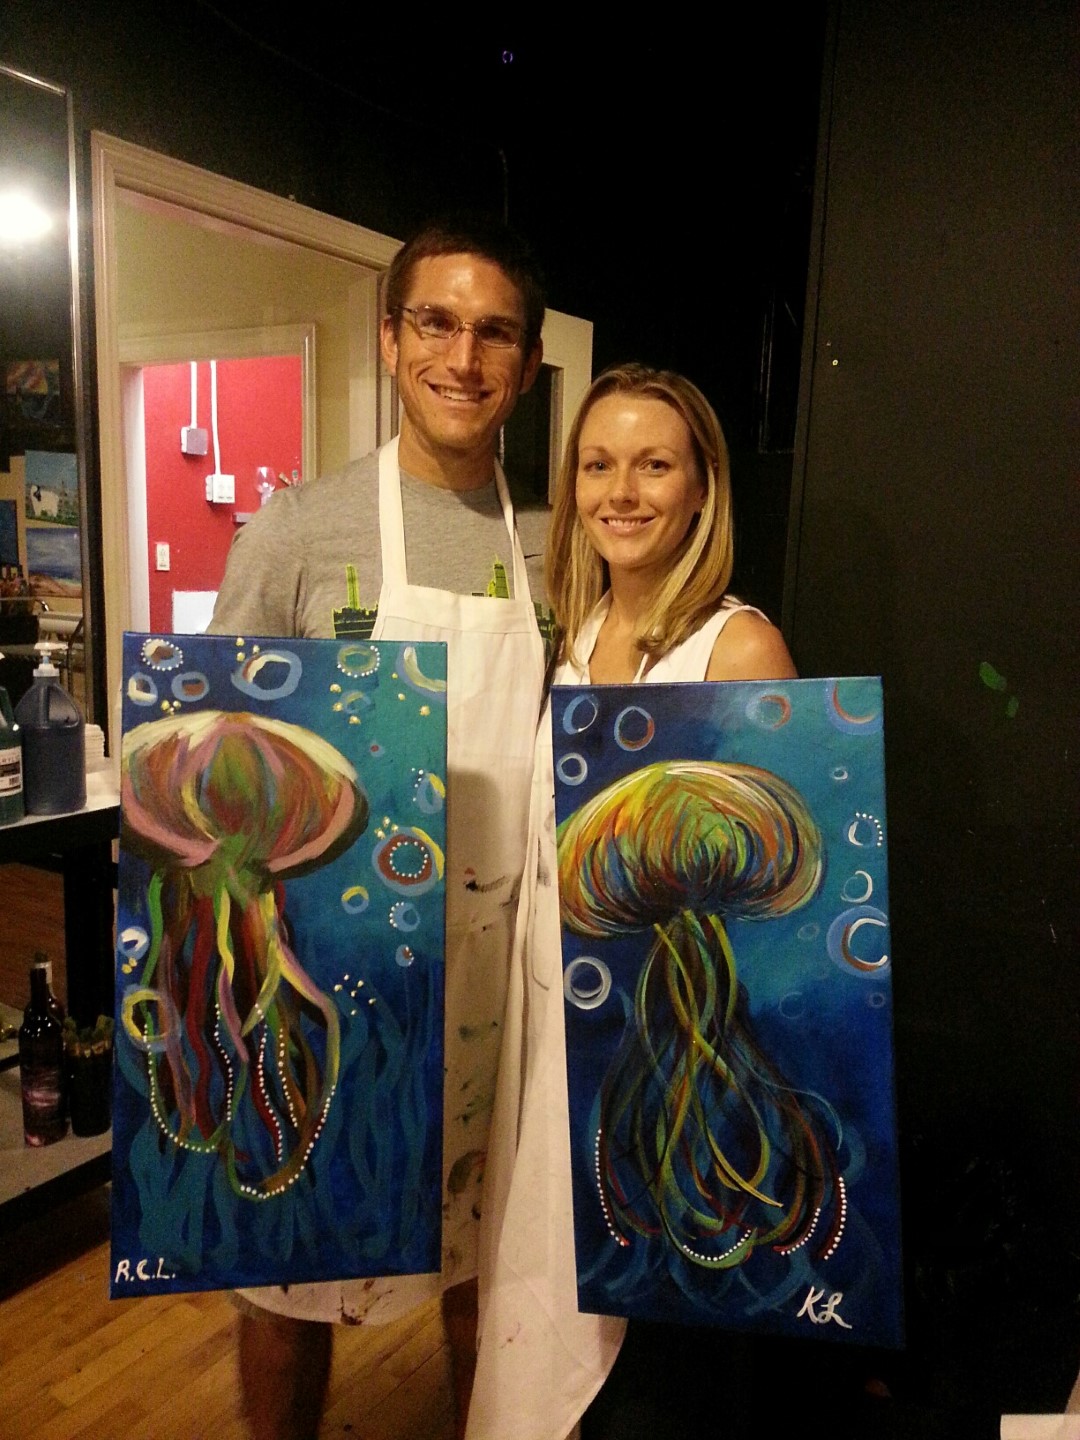 Night out with my love. BYOB paint class.